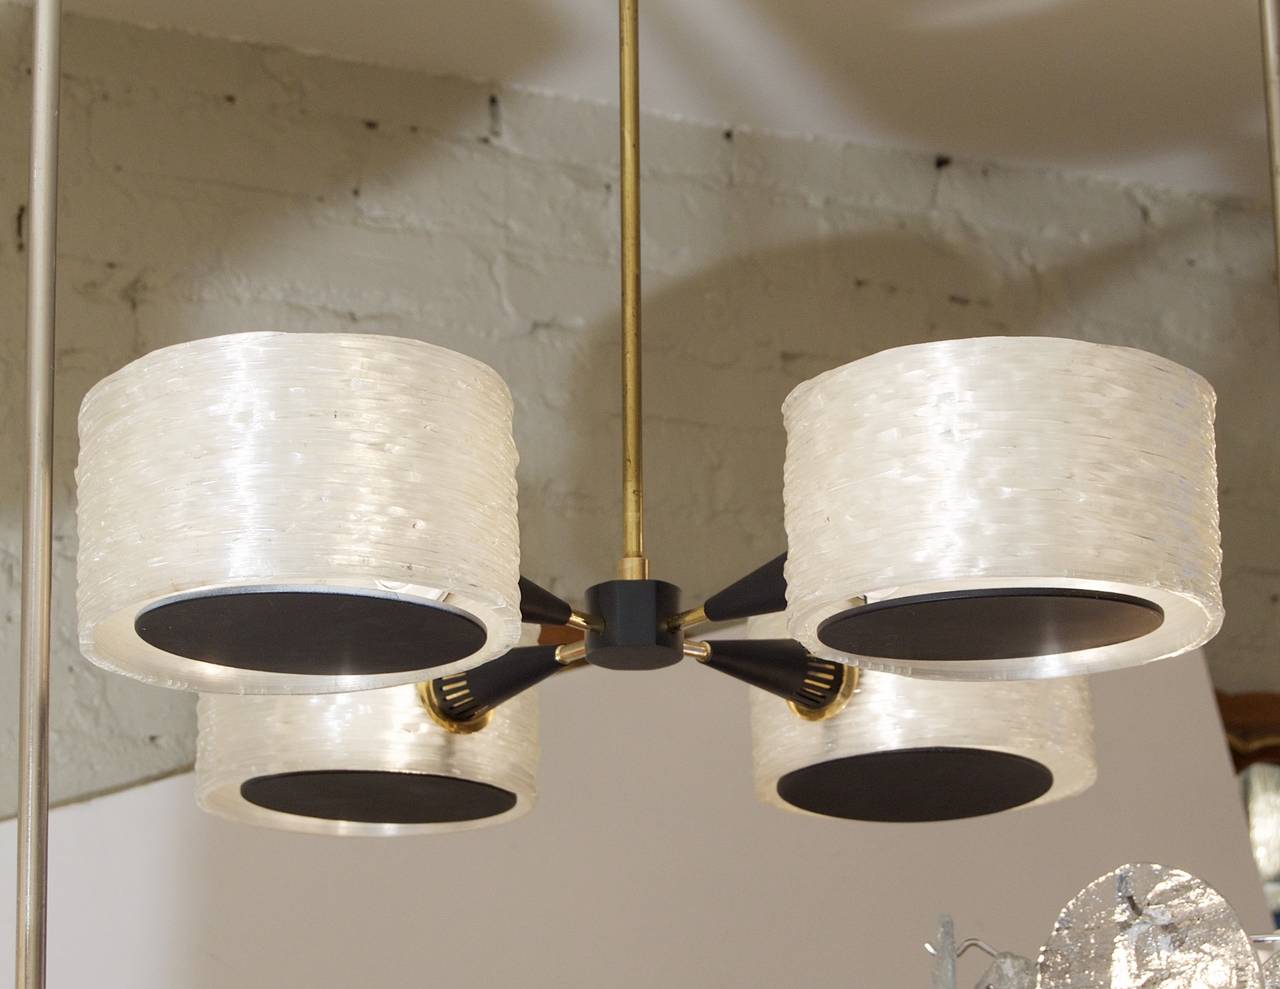 Four brass arms radiating from a central black enameled body each leading to a black enameled cone and spun acrylic cylinder back enameled discs on the bottom of the cylinders.

Takes four candelabra bulbs up to 40 watts per bulb. Height listed is